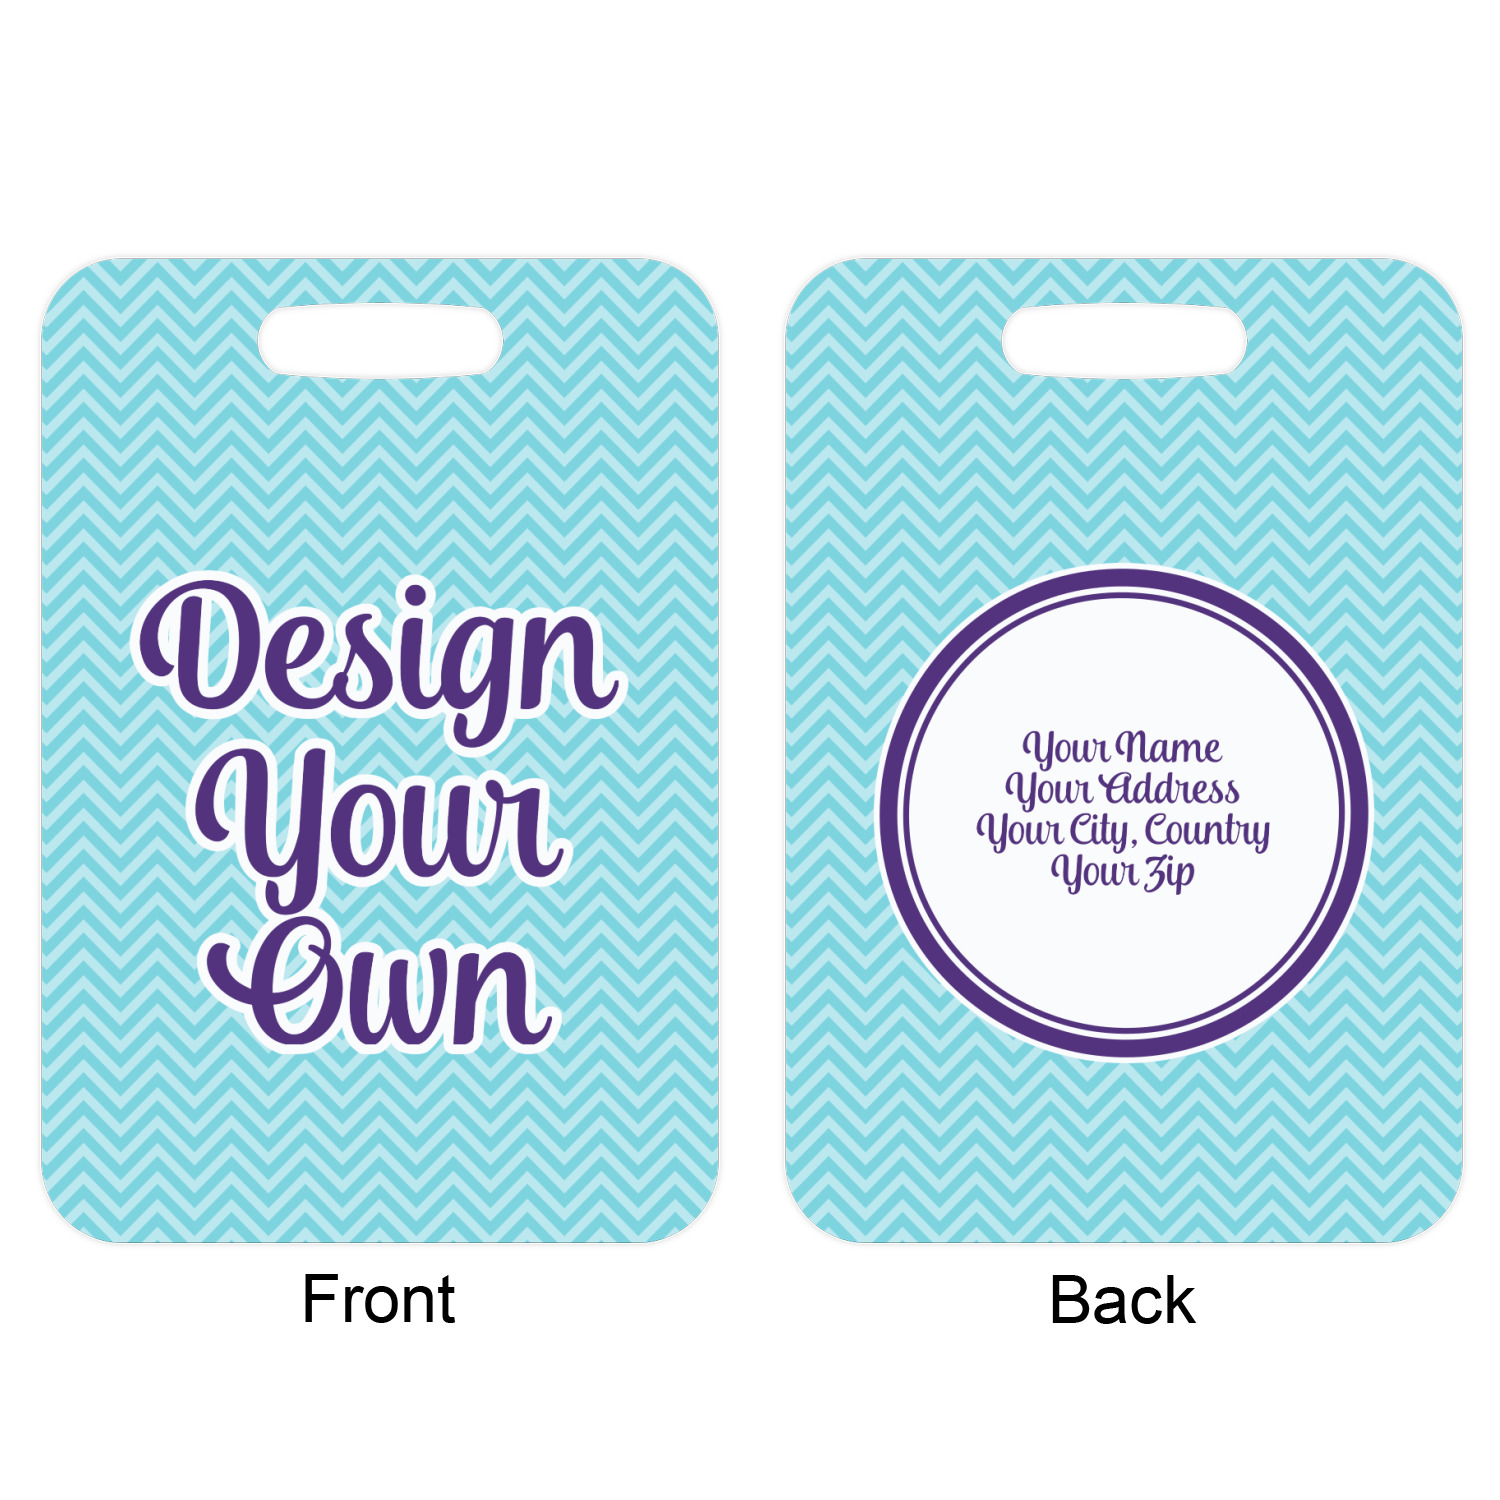 Custom Luggage Tags  Design Your Own Bag Tags